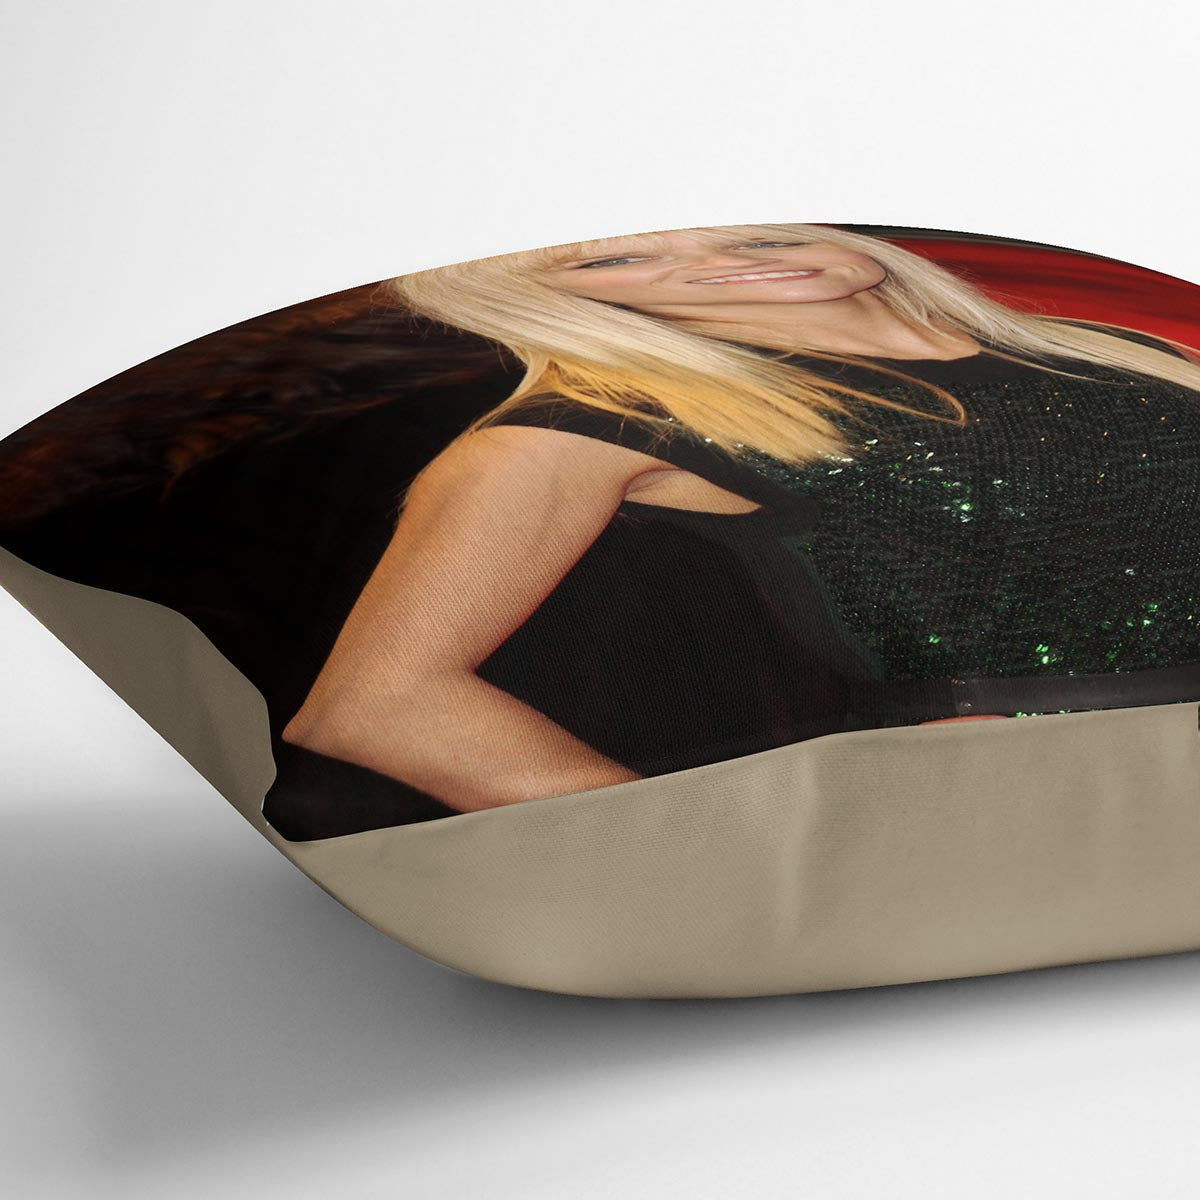 Reese Witherspoon Red Carpet Cushion